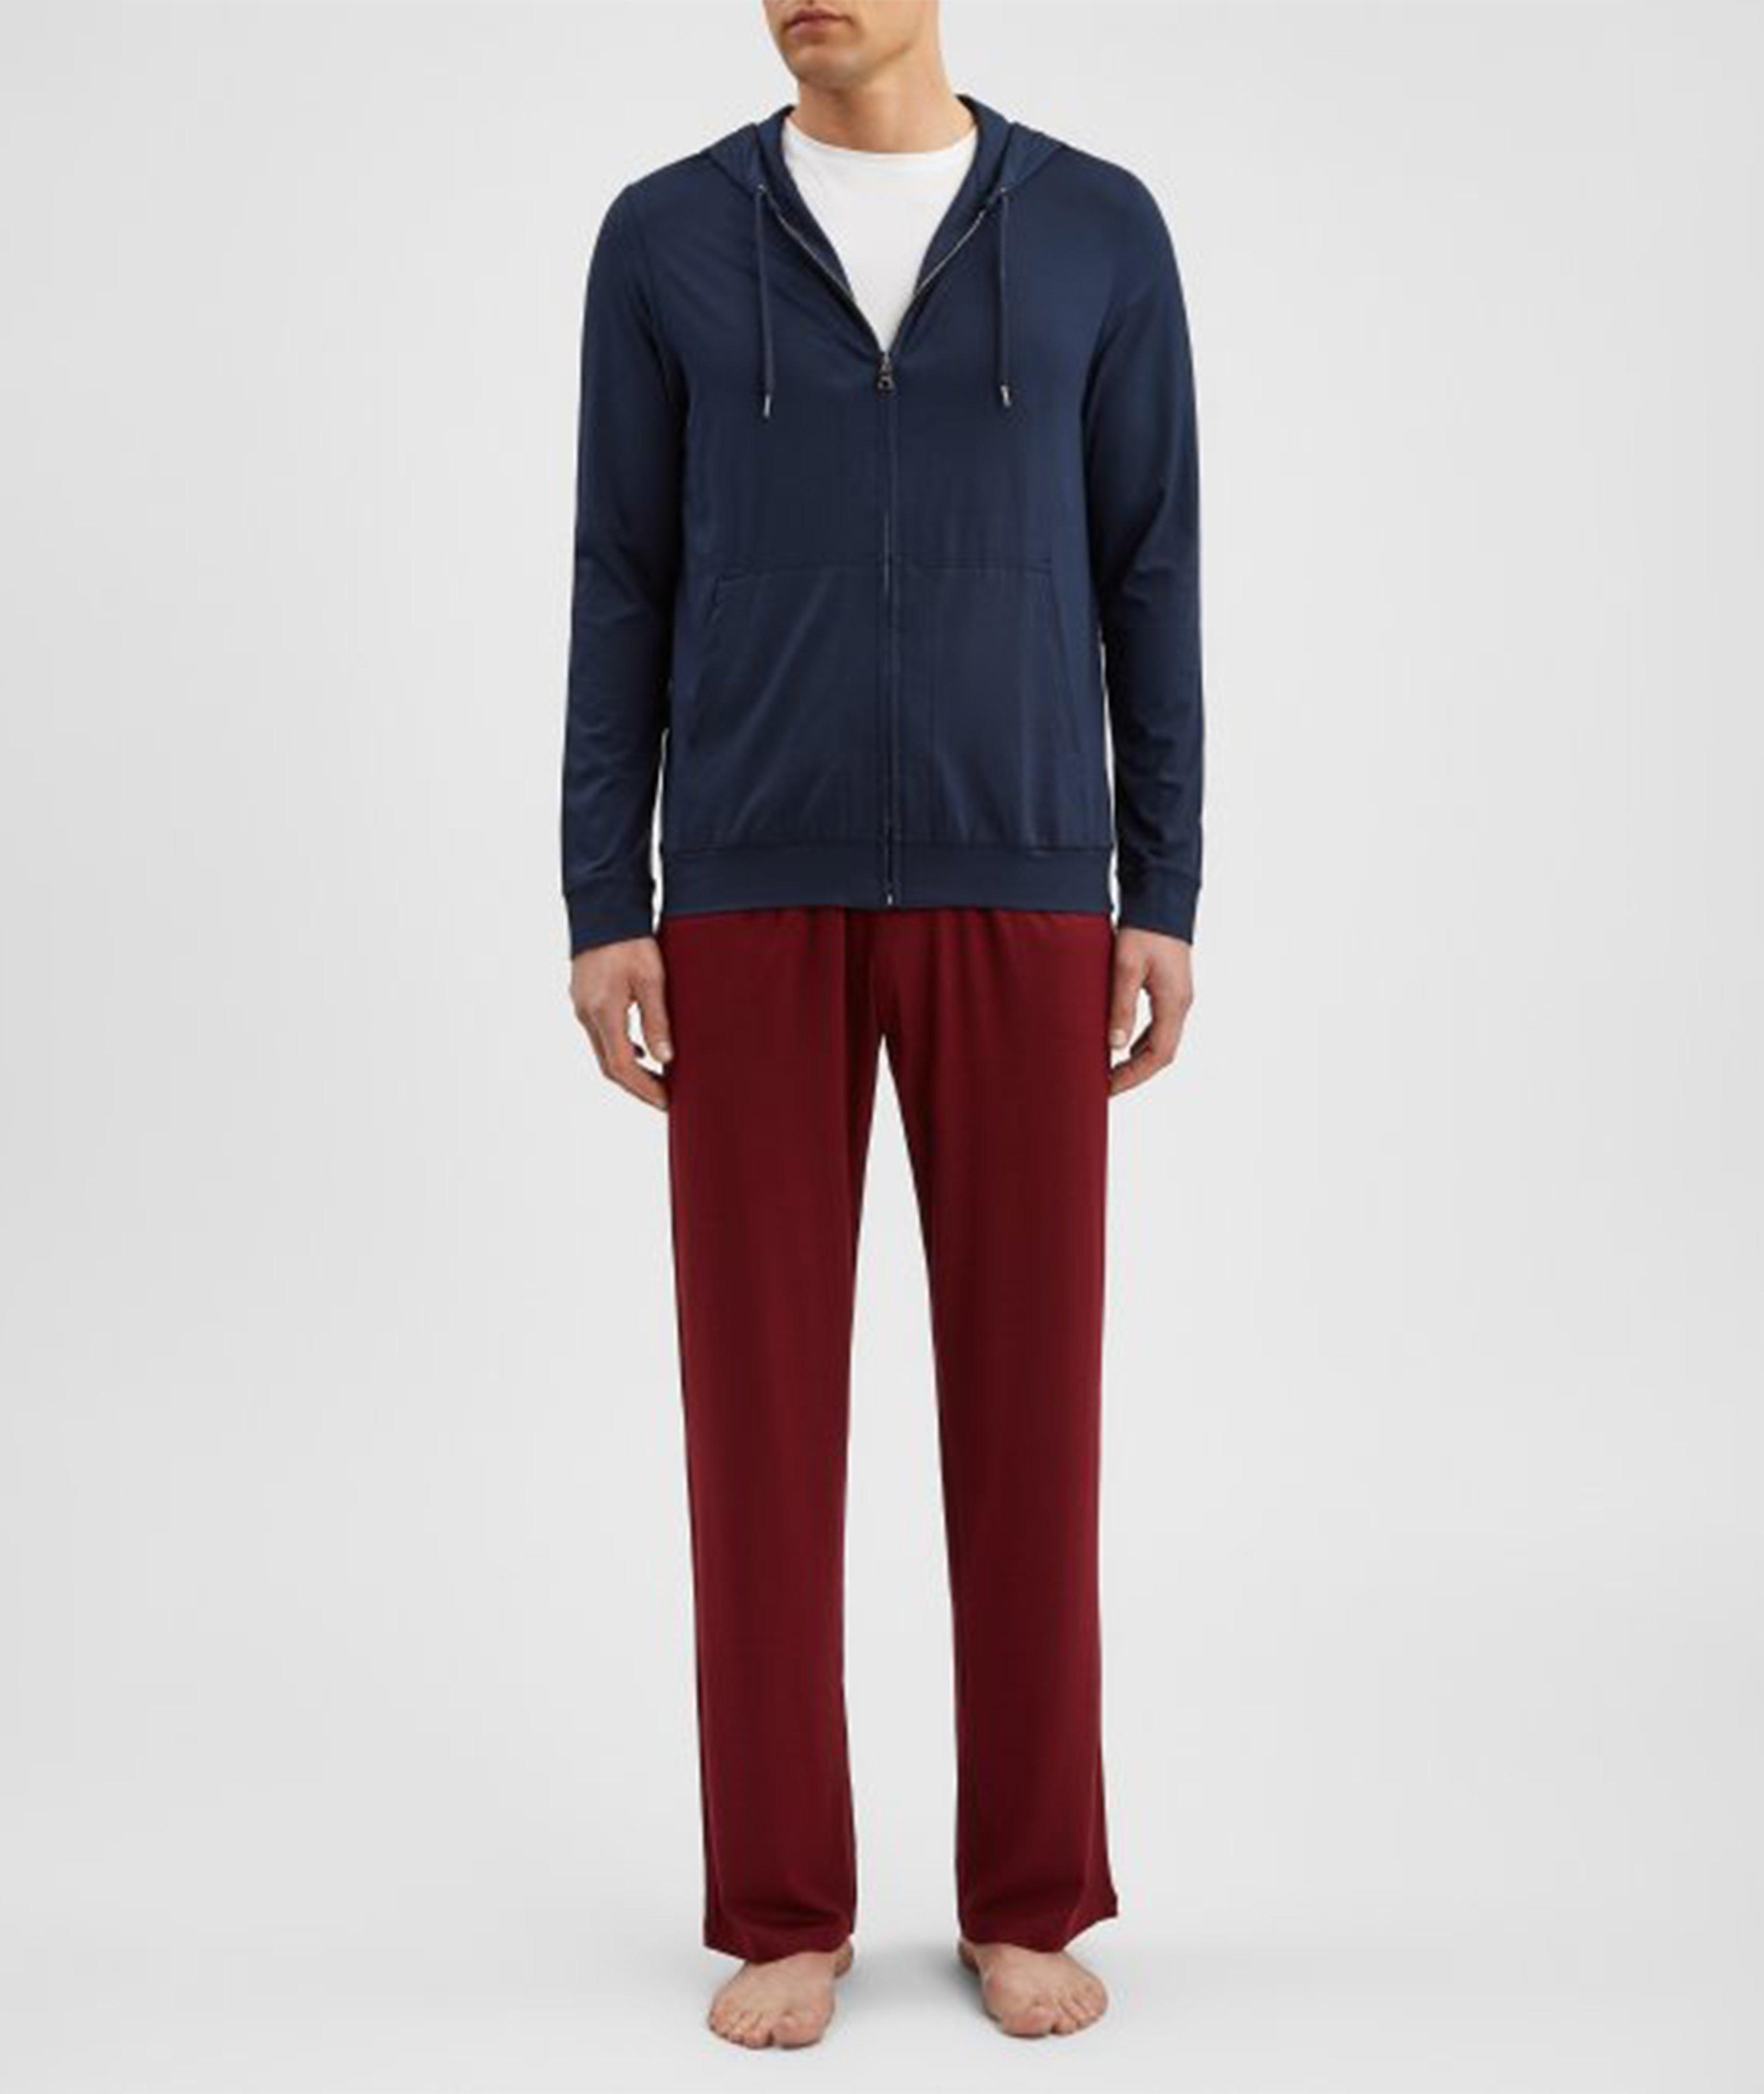 Basel Stretch-Micromodal Hooded Sweater image 2